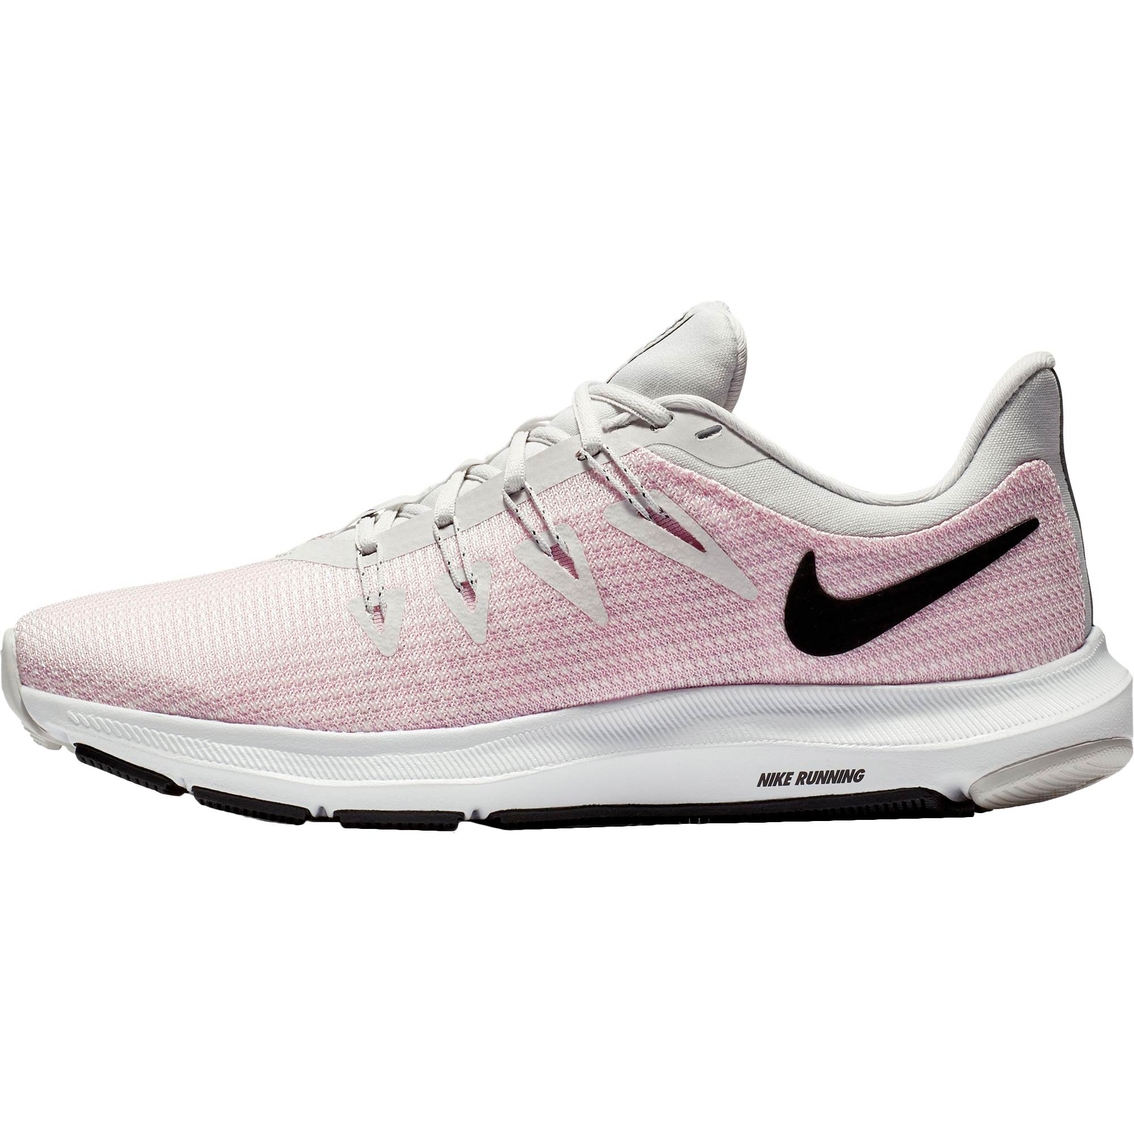 Nike Women's Quest Running Shoes - Image 2 of 6